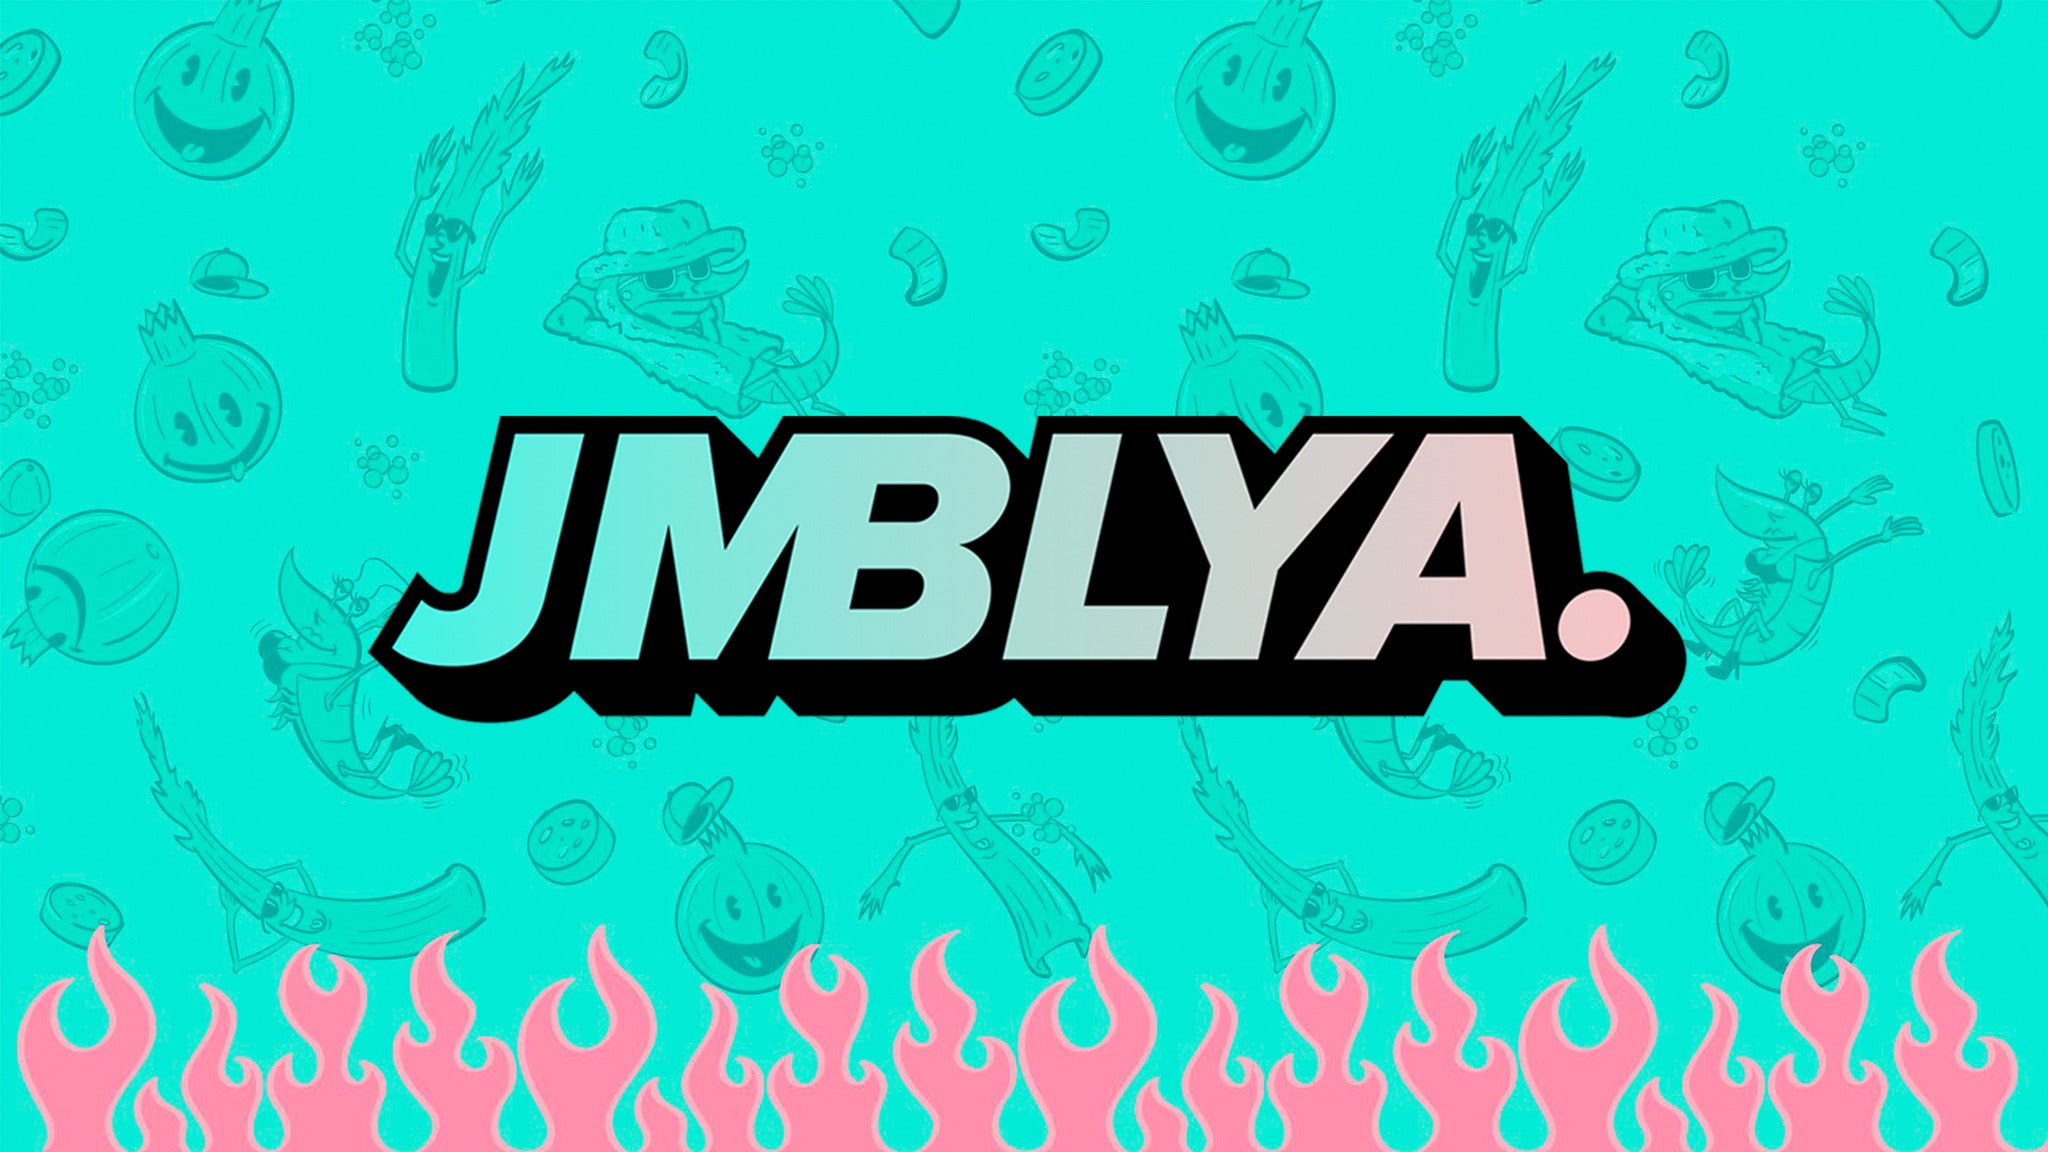 JMBLYA - Future, The Kid LAROI + More presale password for early tickets in Mansfield